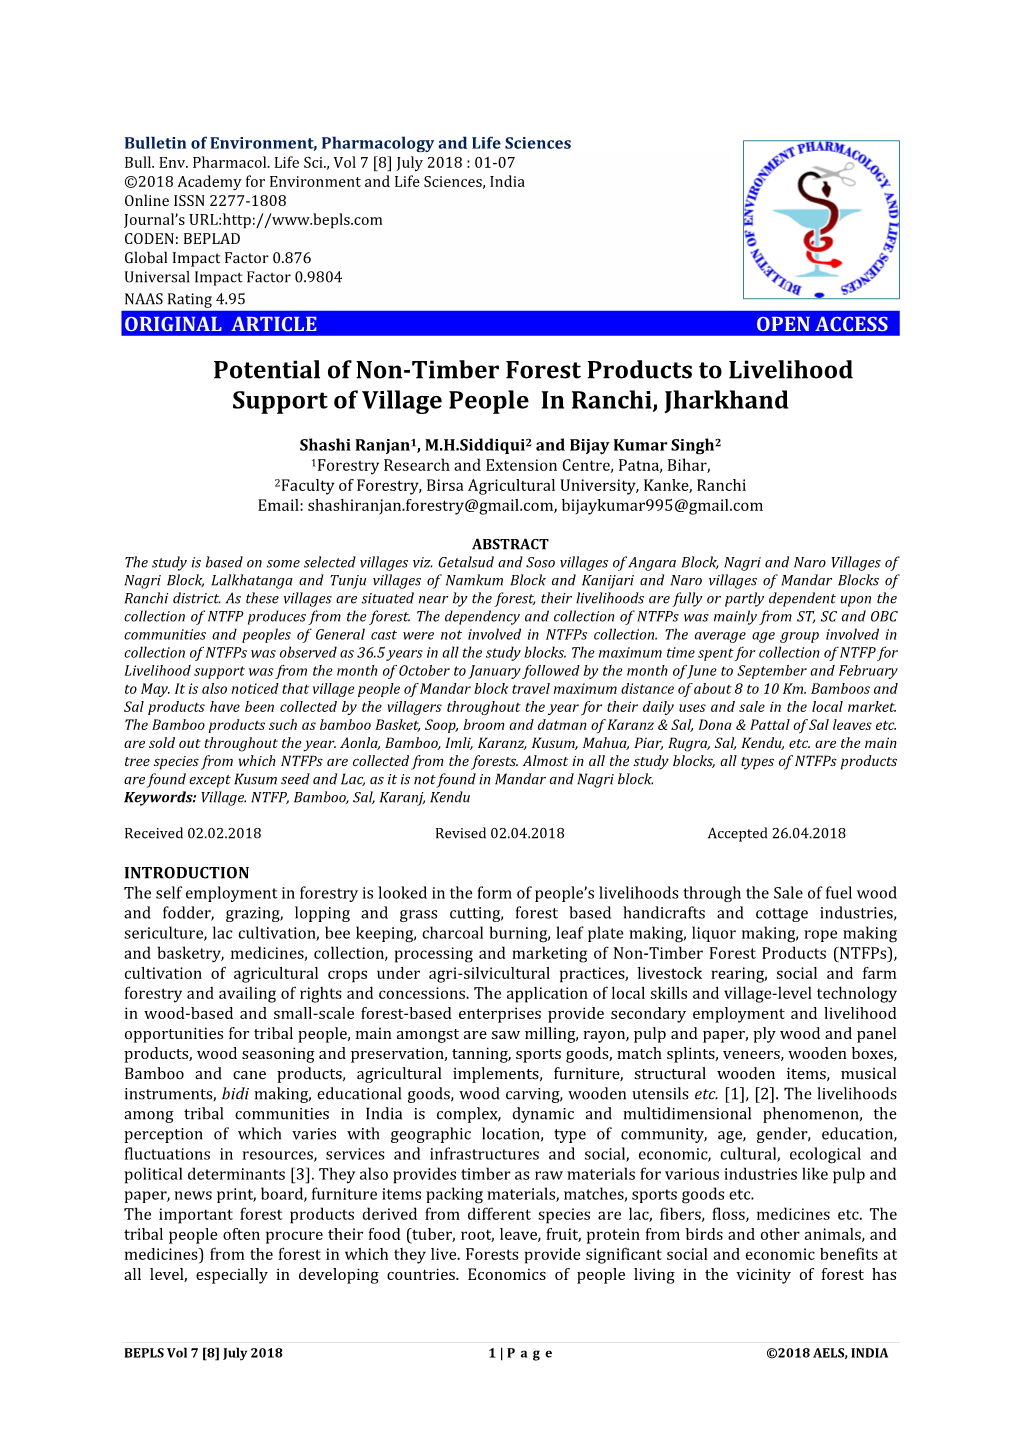 Potential of Non-Timber Forest Products to Livelihood Support of Village People in Ranchi, Jharkhand